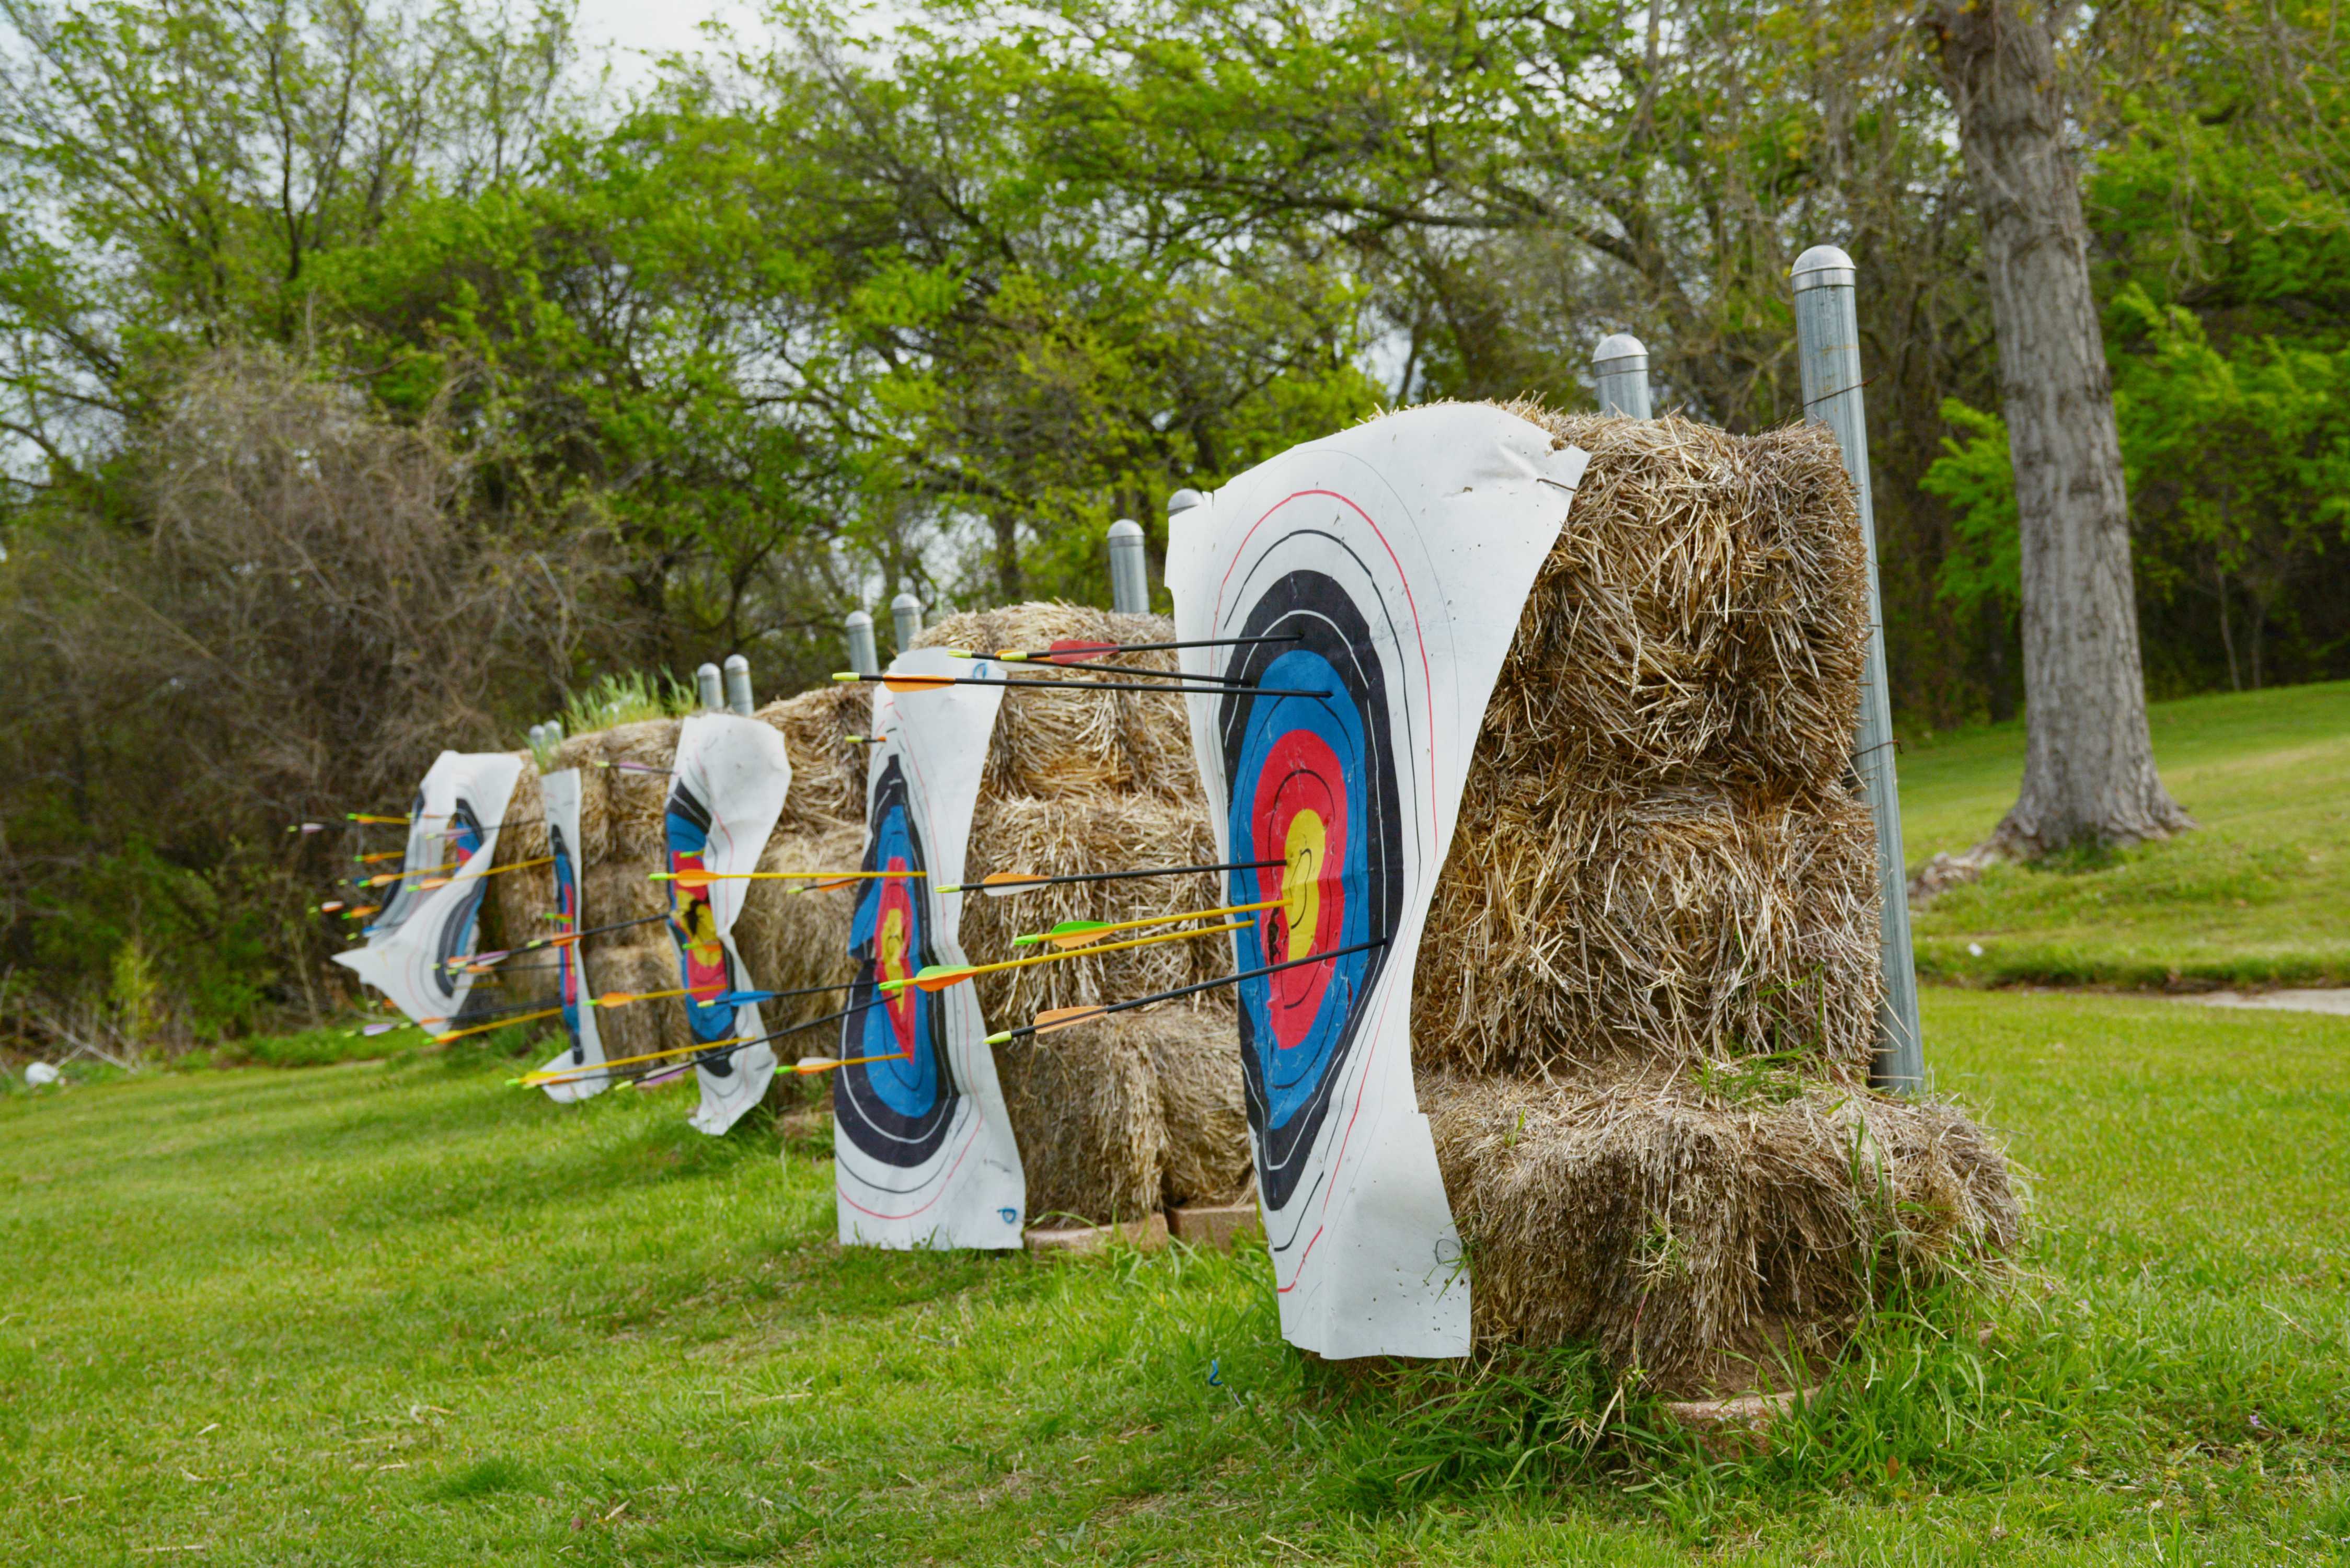 Gregorio Hernandez, Brookhaven College physical education instructor, gives his archery class a challenge – each student must shoot once per target, and the class total must beat 150 points. The class scored 175 points.